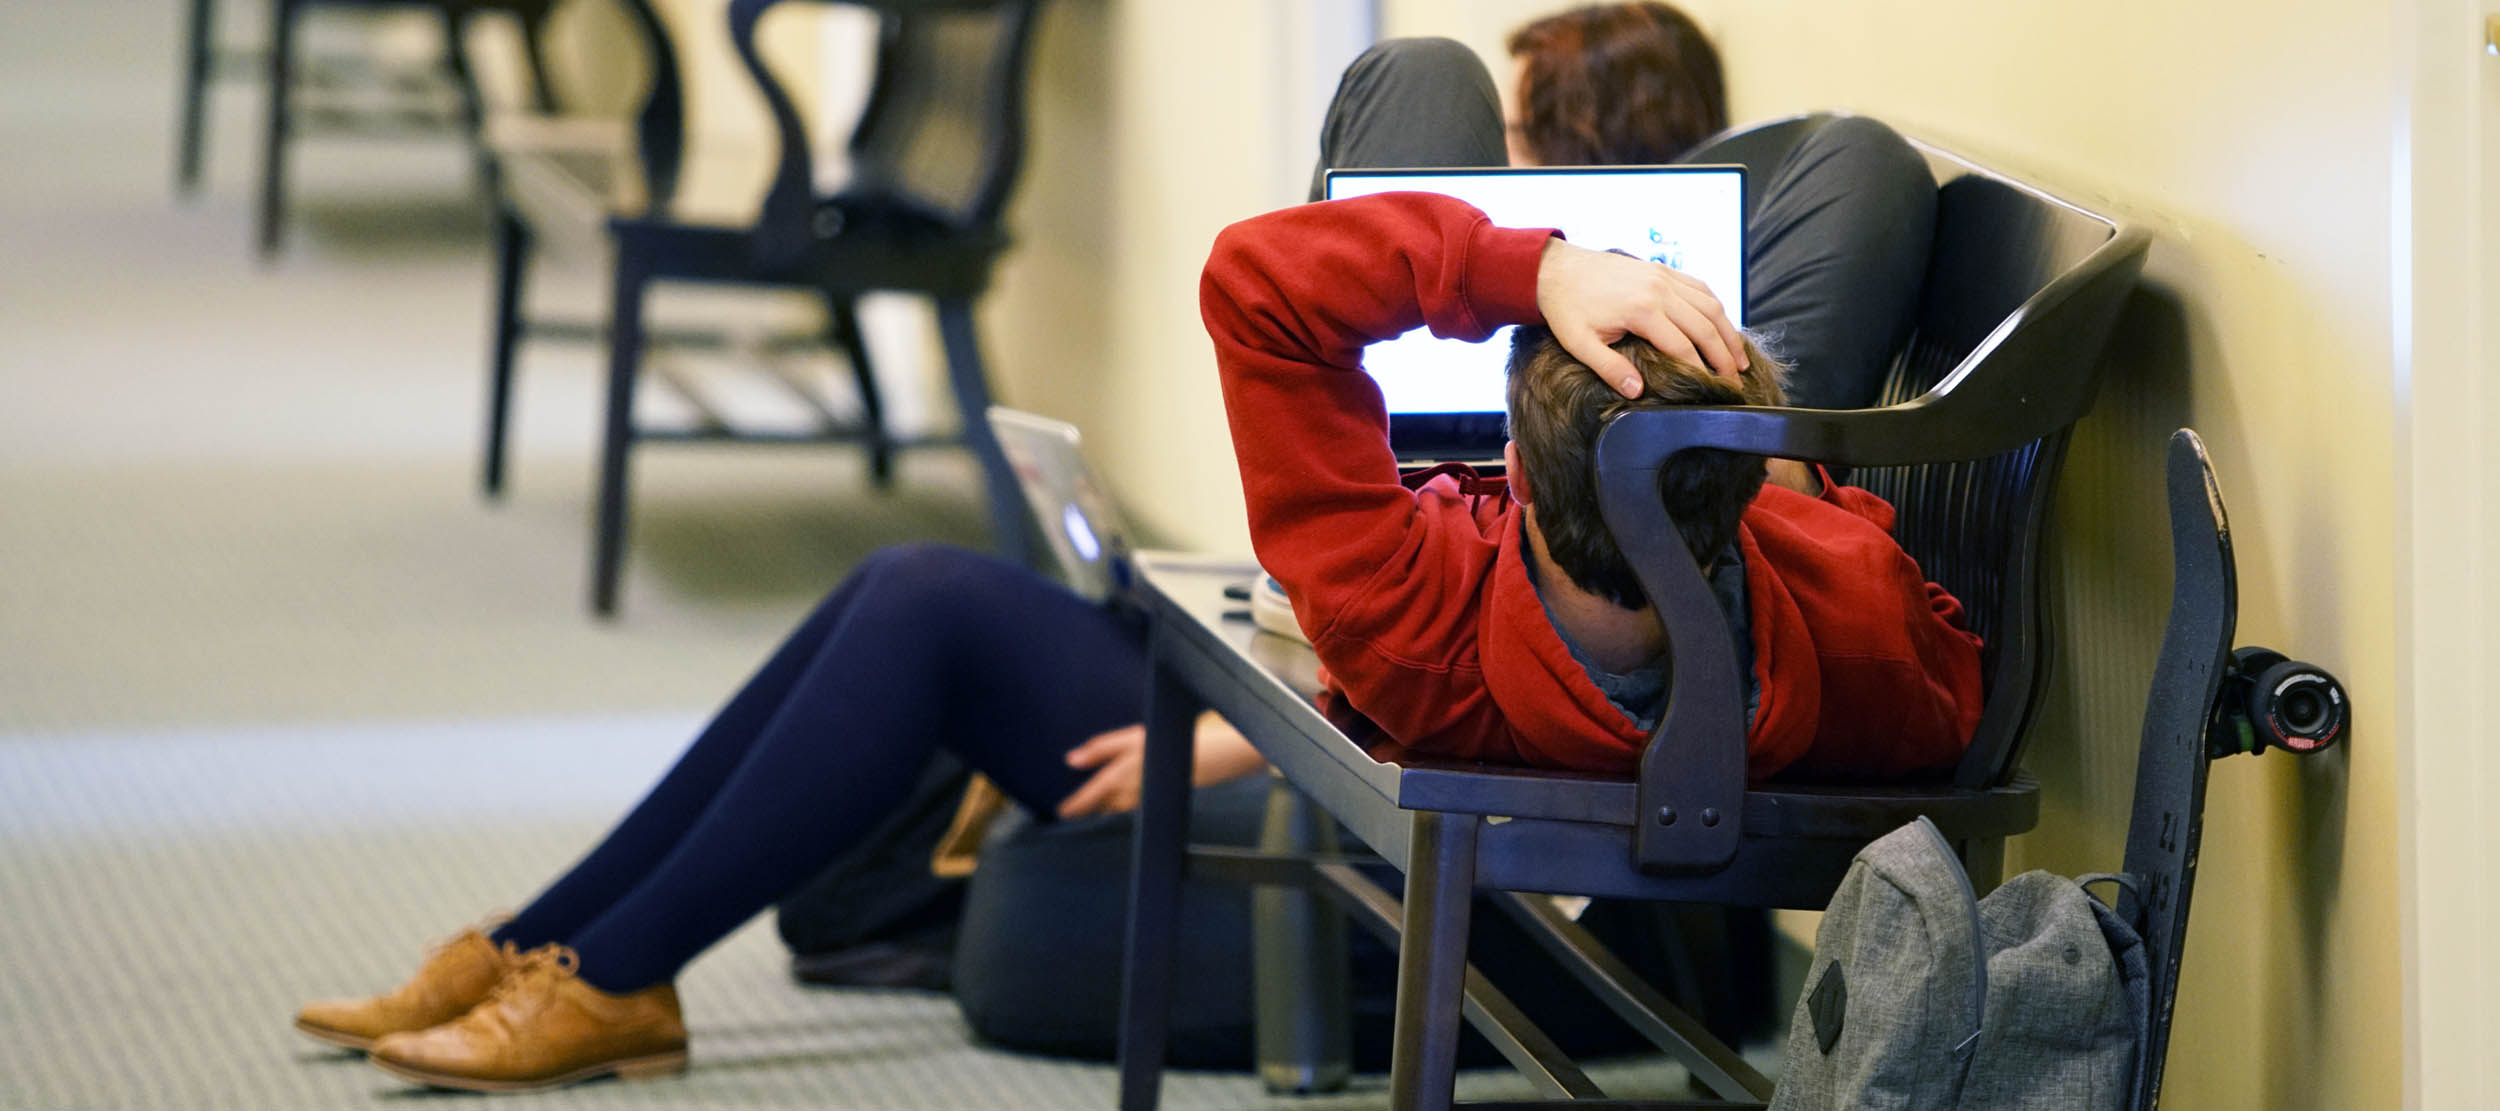  A student uses his laptop while reclined on a bench in a second-floor hallway